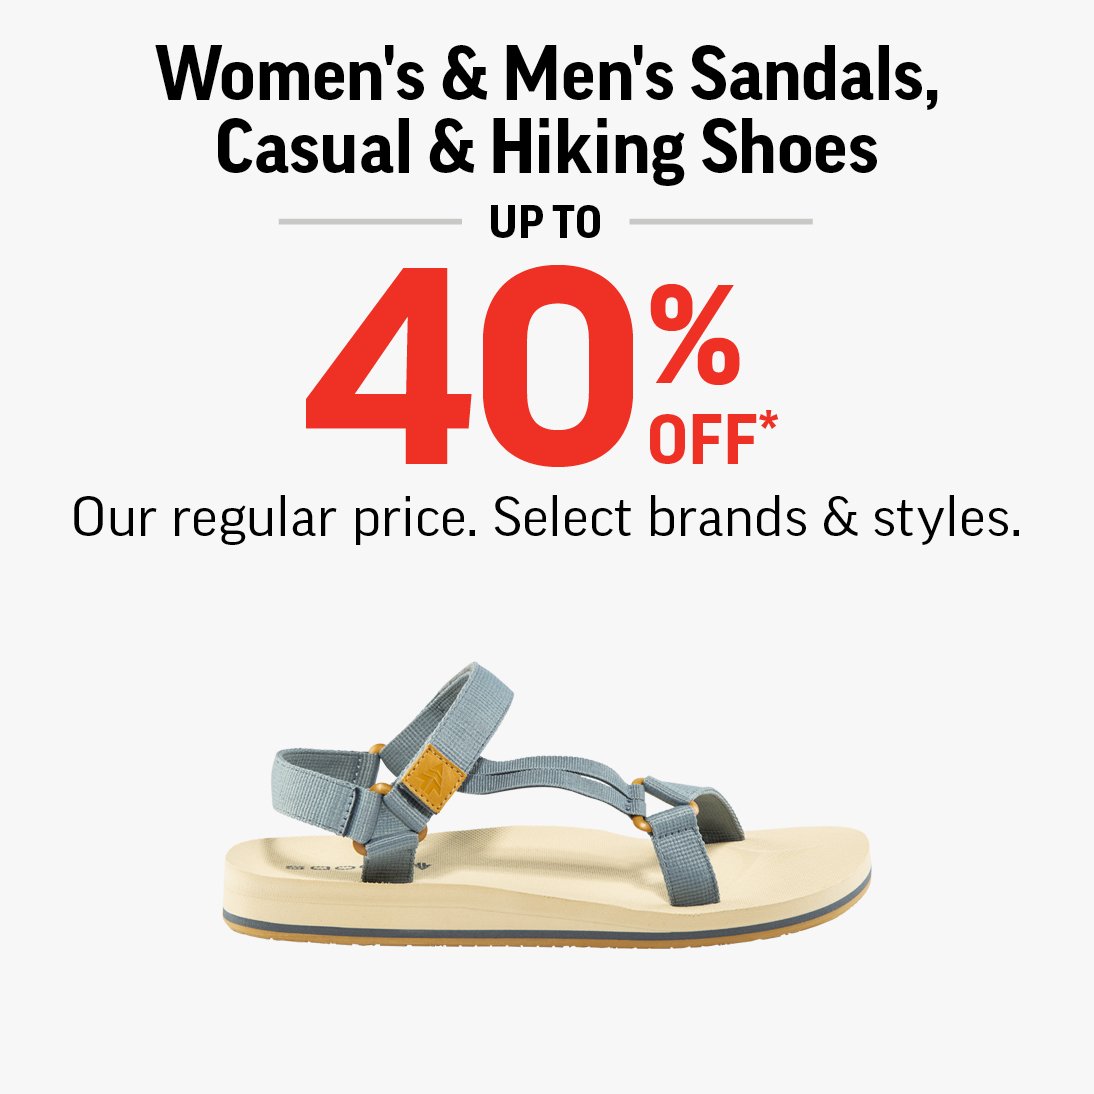 WOMEN'S & MEN'S SANDALS, CASUAL & HIKING  SHOES UP TO 40% OFF